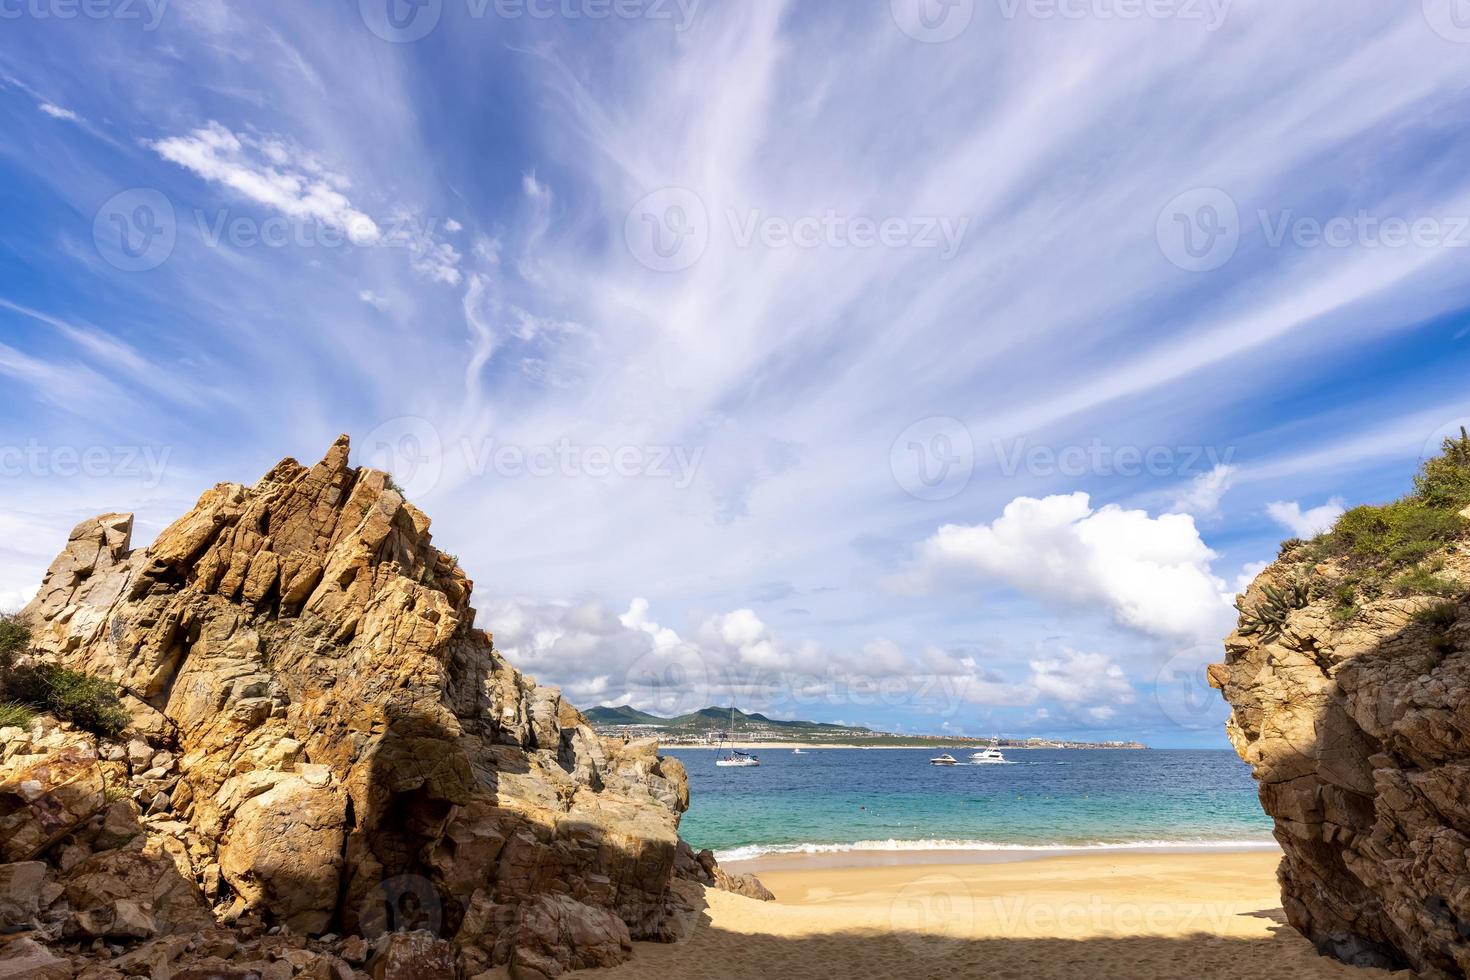 Mexico, scenic serene beaches and playas of Cabo San Lucas, Los Cabos, in tourism Hotel Zone photo